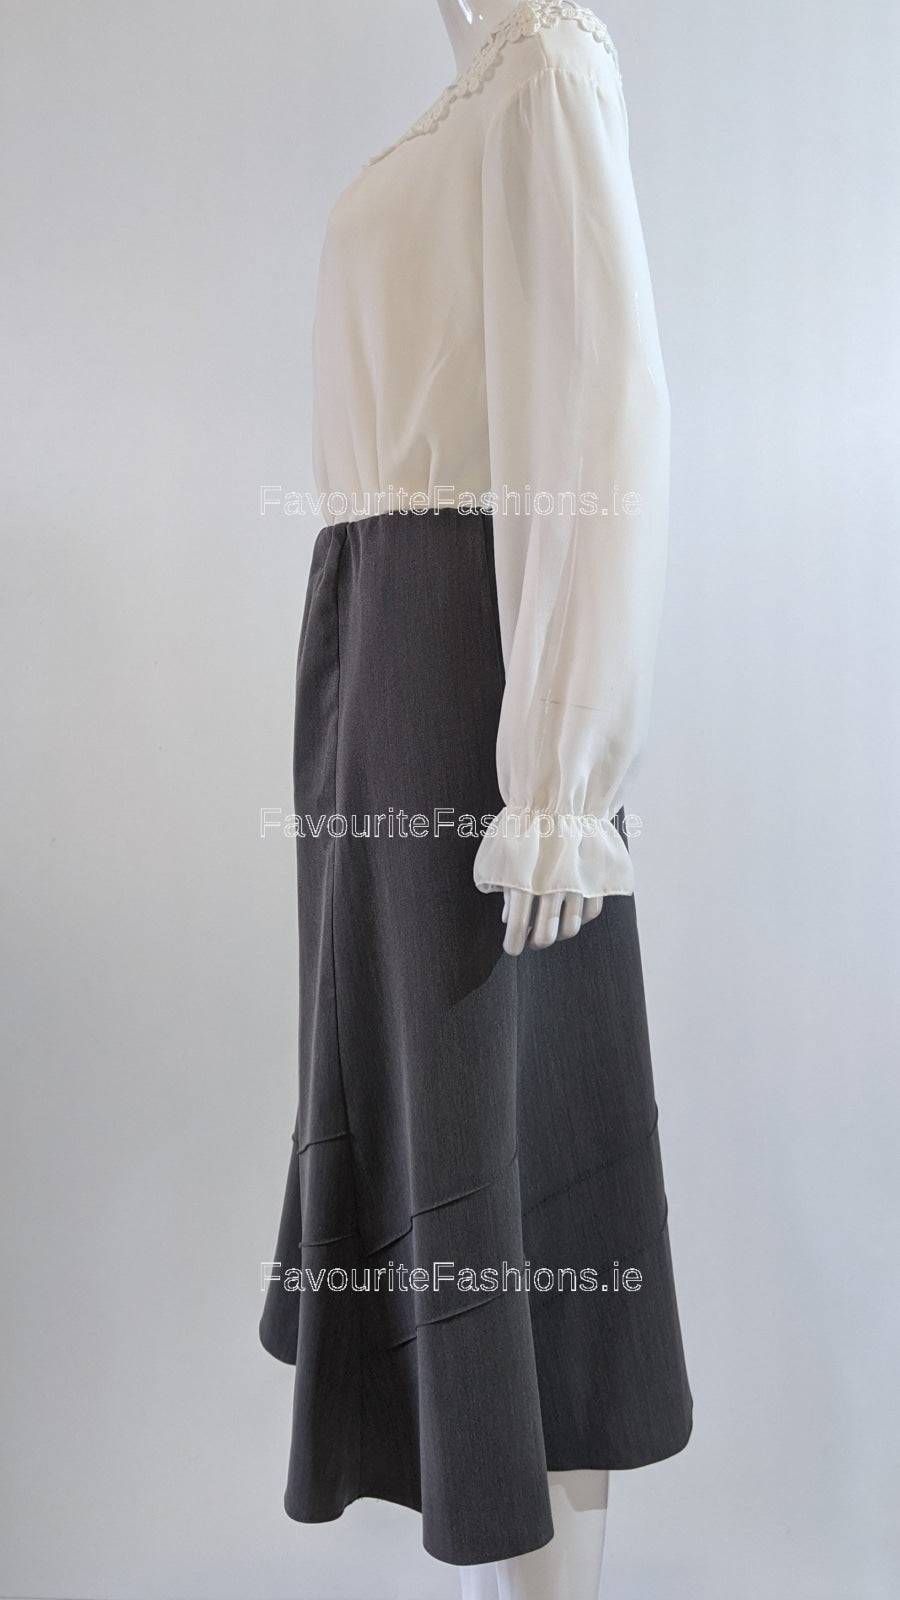 Grey Lined Elasticated A-Line Skirt